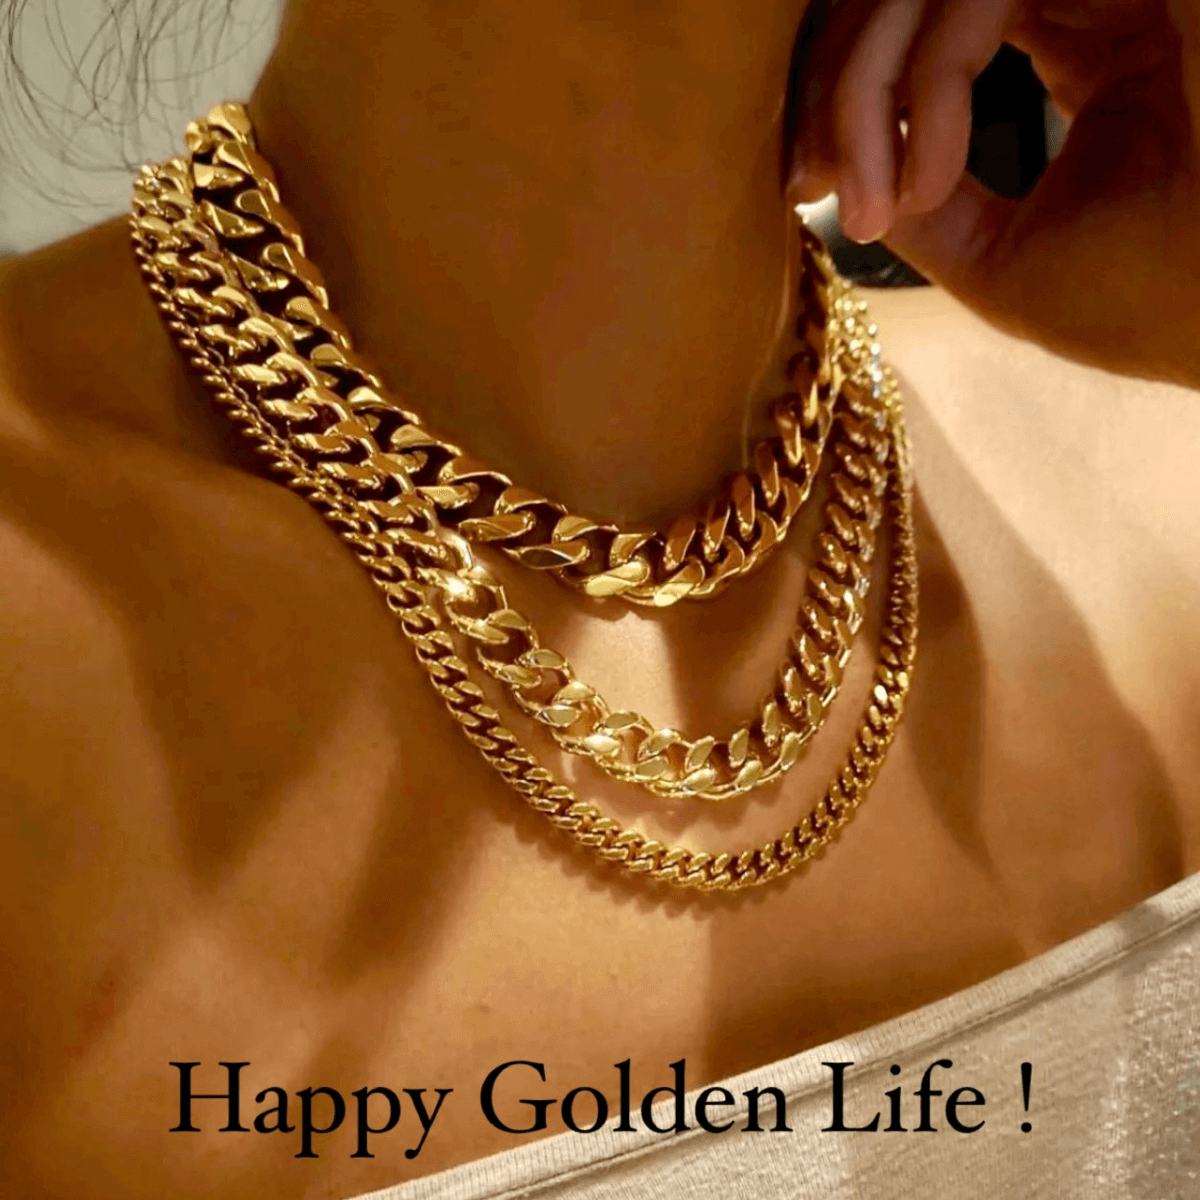 Best Gold Chain Necklace Jewelry Gift, Best Aesthetic Yellow Gold Chunky Chain  Necklace Jewelry Gift for Women, Girls